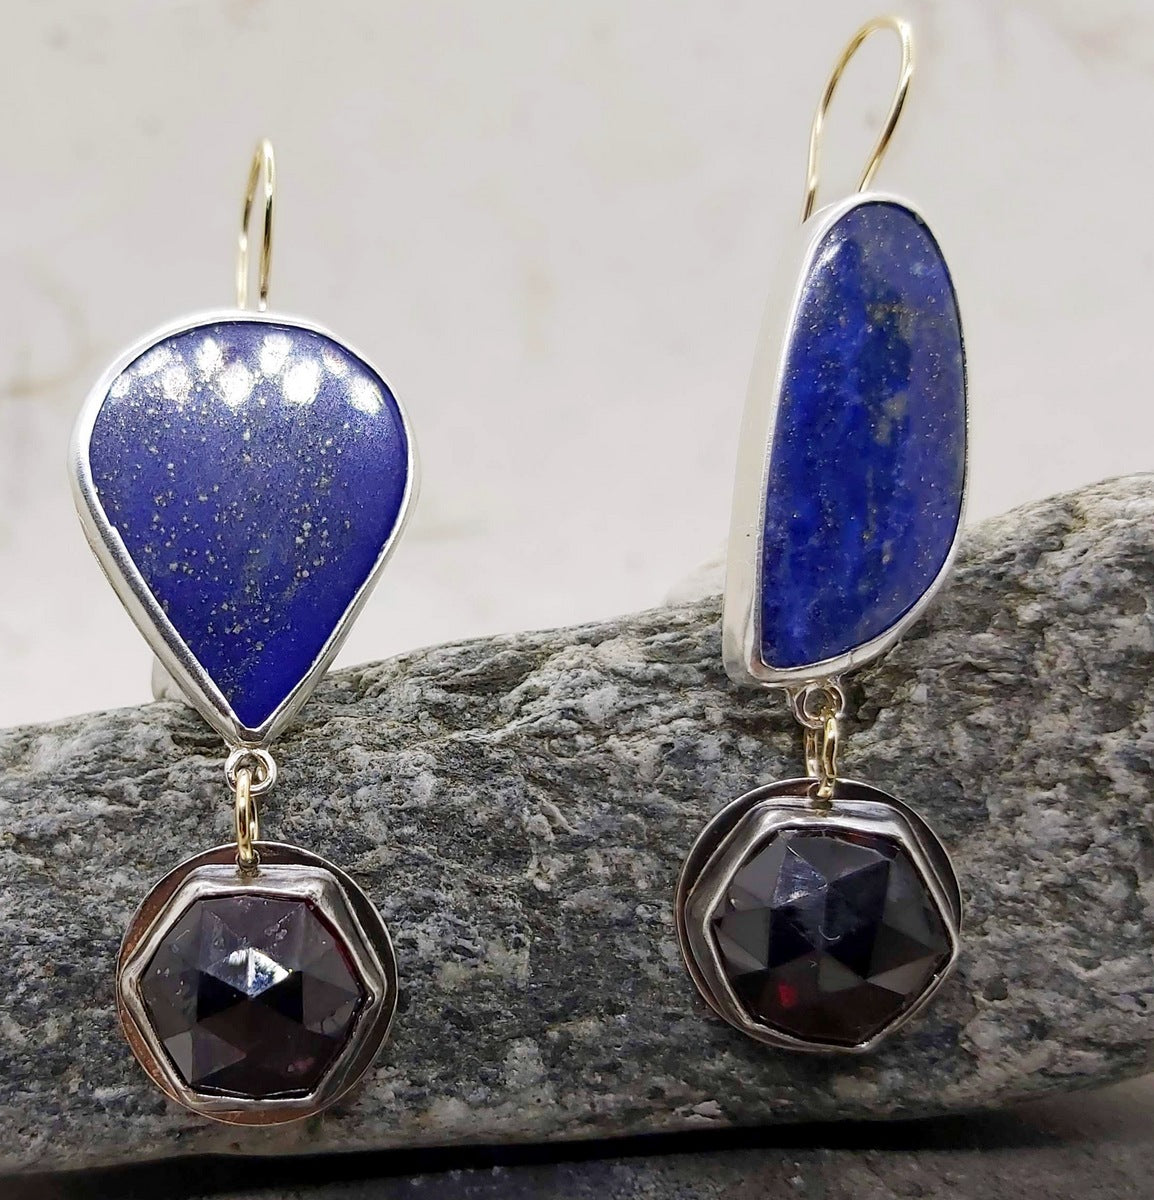 Double stone earrings, flat shaped Lapis Lazuli and faceted hexagonal garnets.